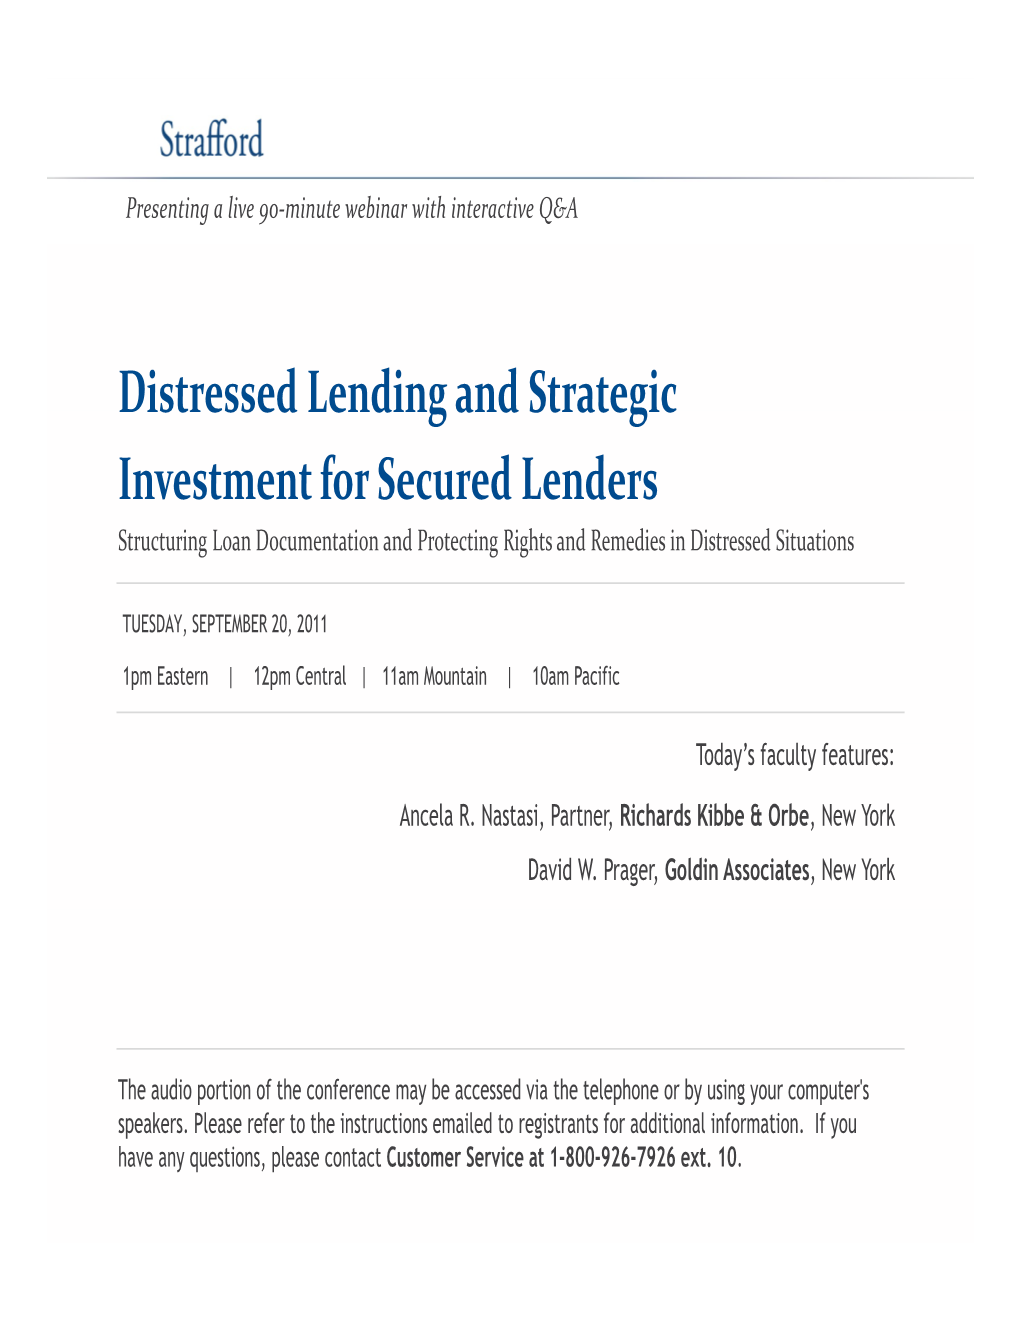 Distressed Lending and Strategic Investment for Secured Lenders Structuring Loan Documentation and Protecting Rights and Remedies in Distressed Situations